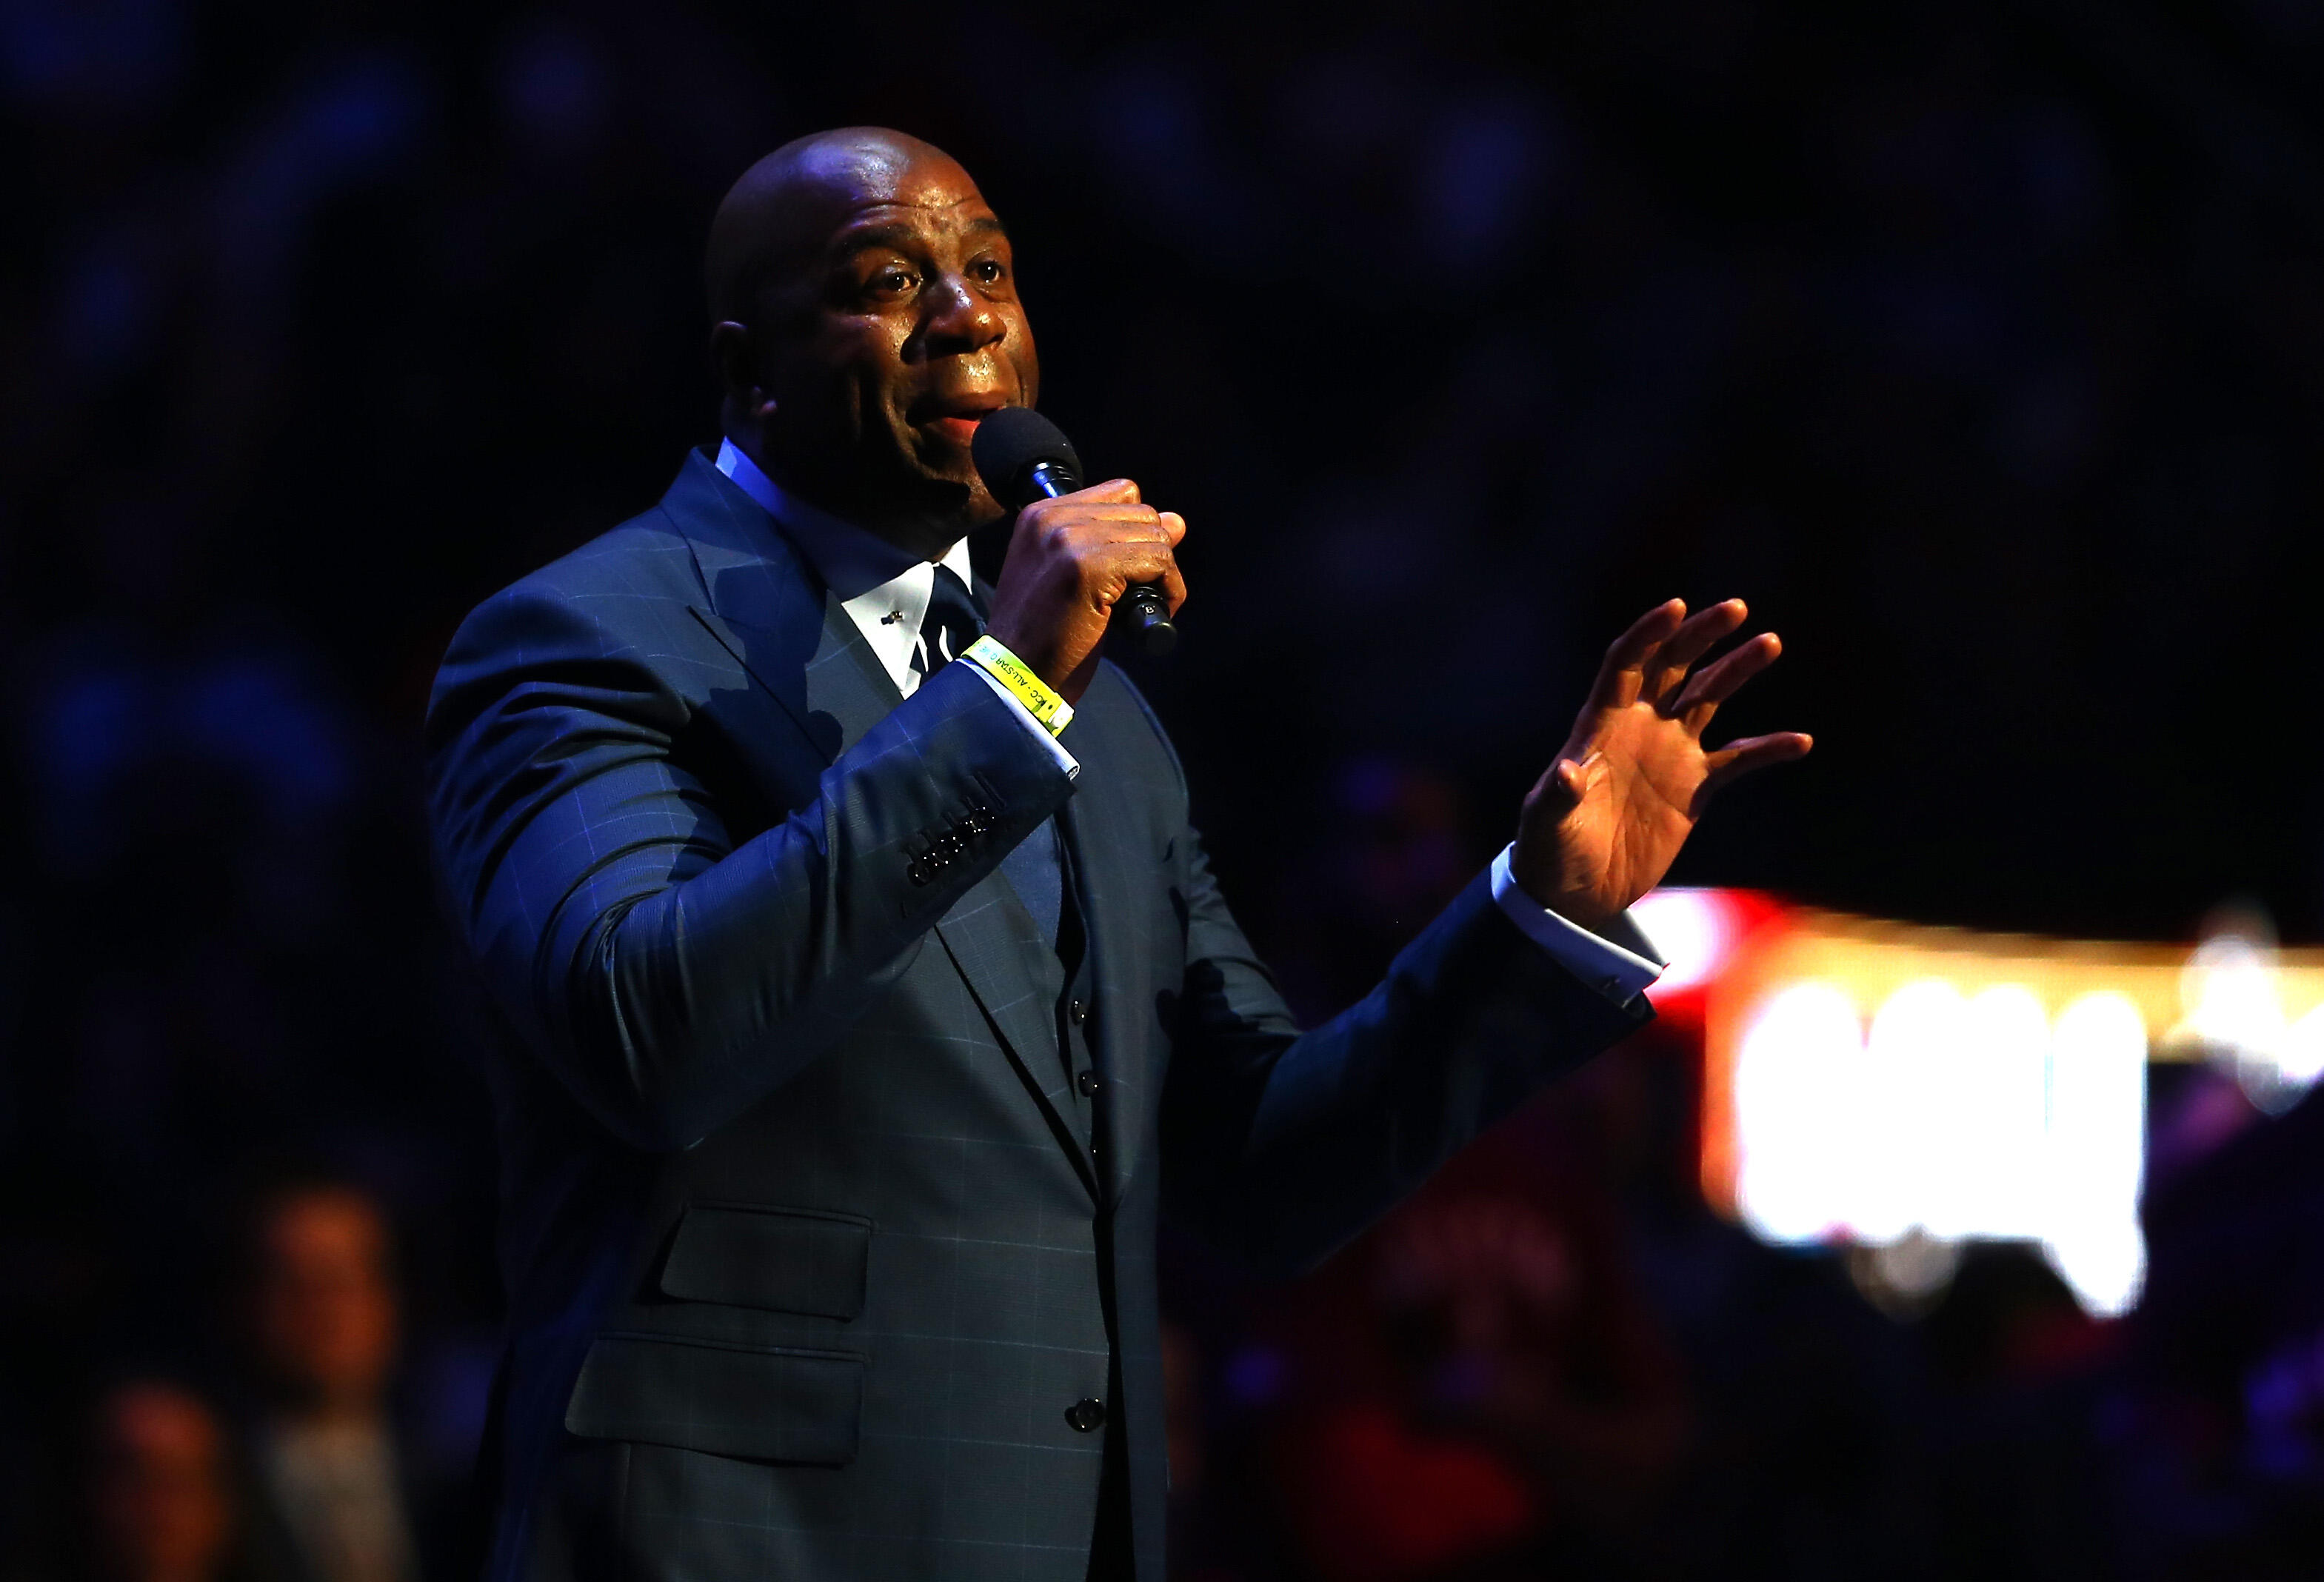 TORONTO, ON - FEBRUARY 14: Earvin Magic Johnson speaks about Kobe Bryant #24 of the Los Angeles Lakers and the Western Conference before the NBA All-Star Game 2016 at the Air Canada Centre on February 14, 2016 in Toronto, Ontario. NOTE TO USER: User expre